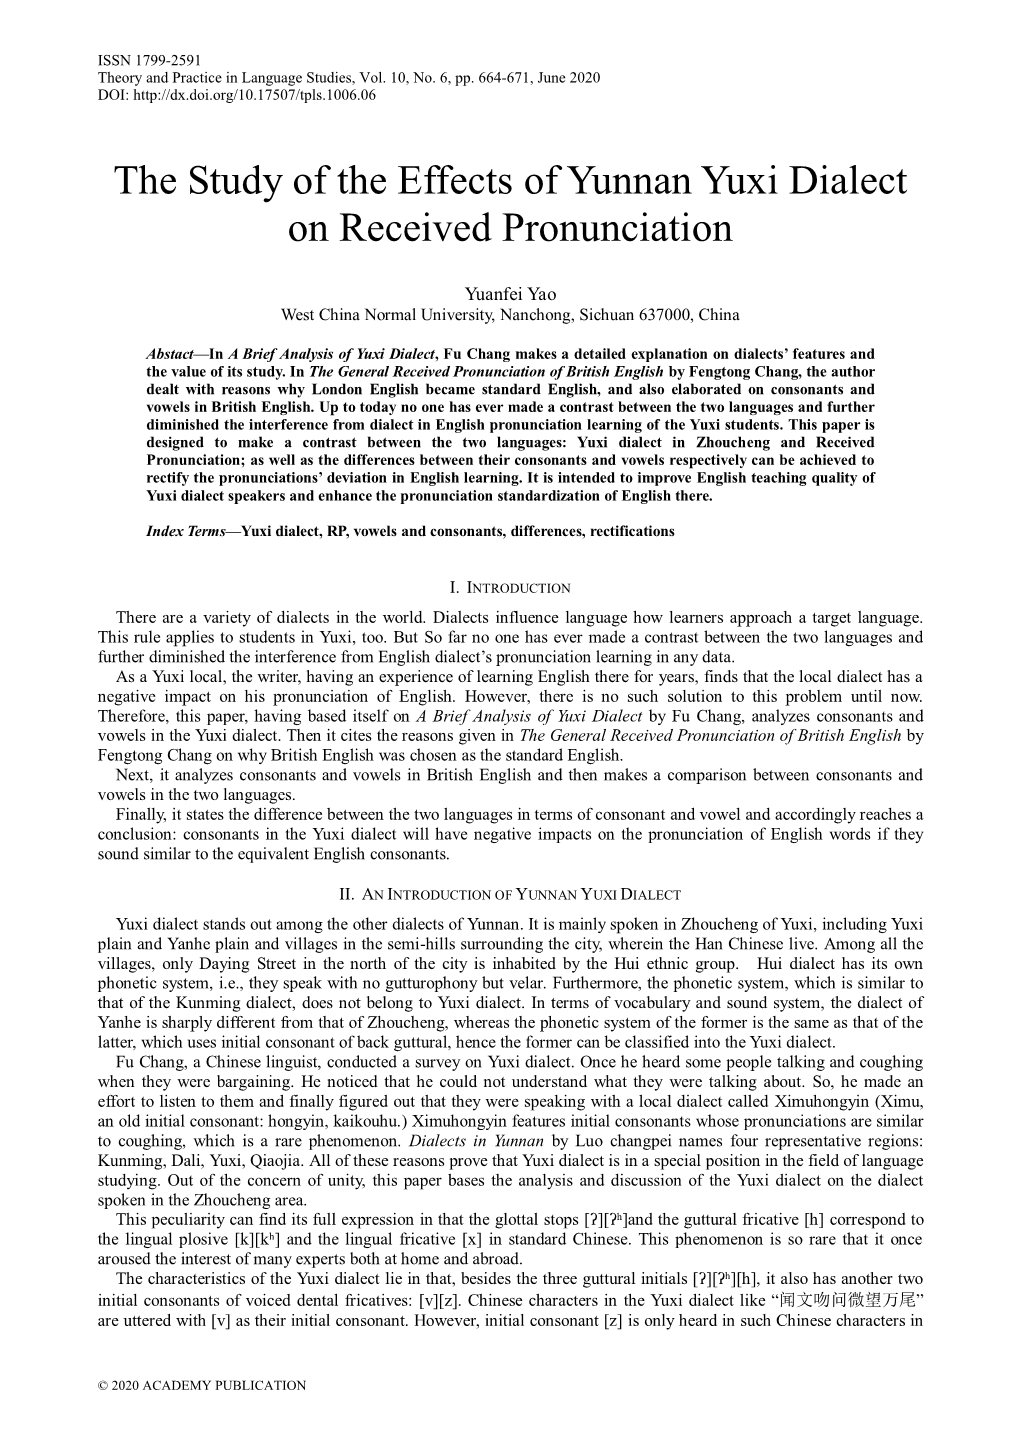 The Study of the Effects of Yunnan Yuxi Dialect on Received Pronunciation